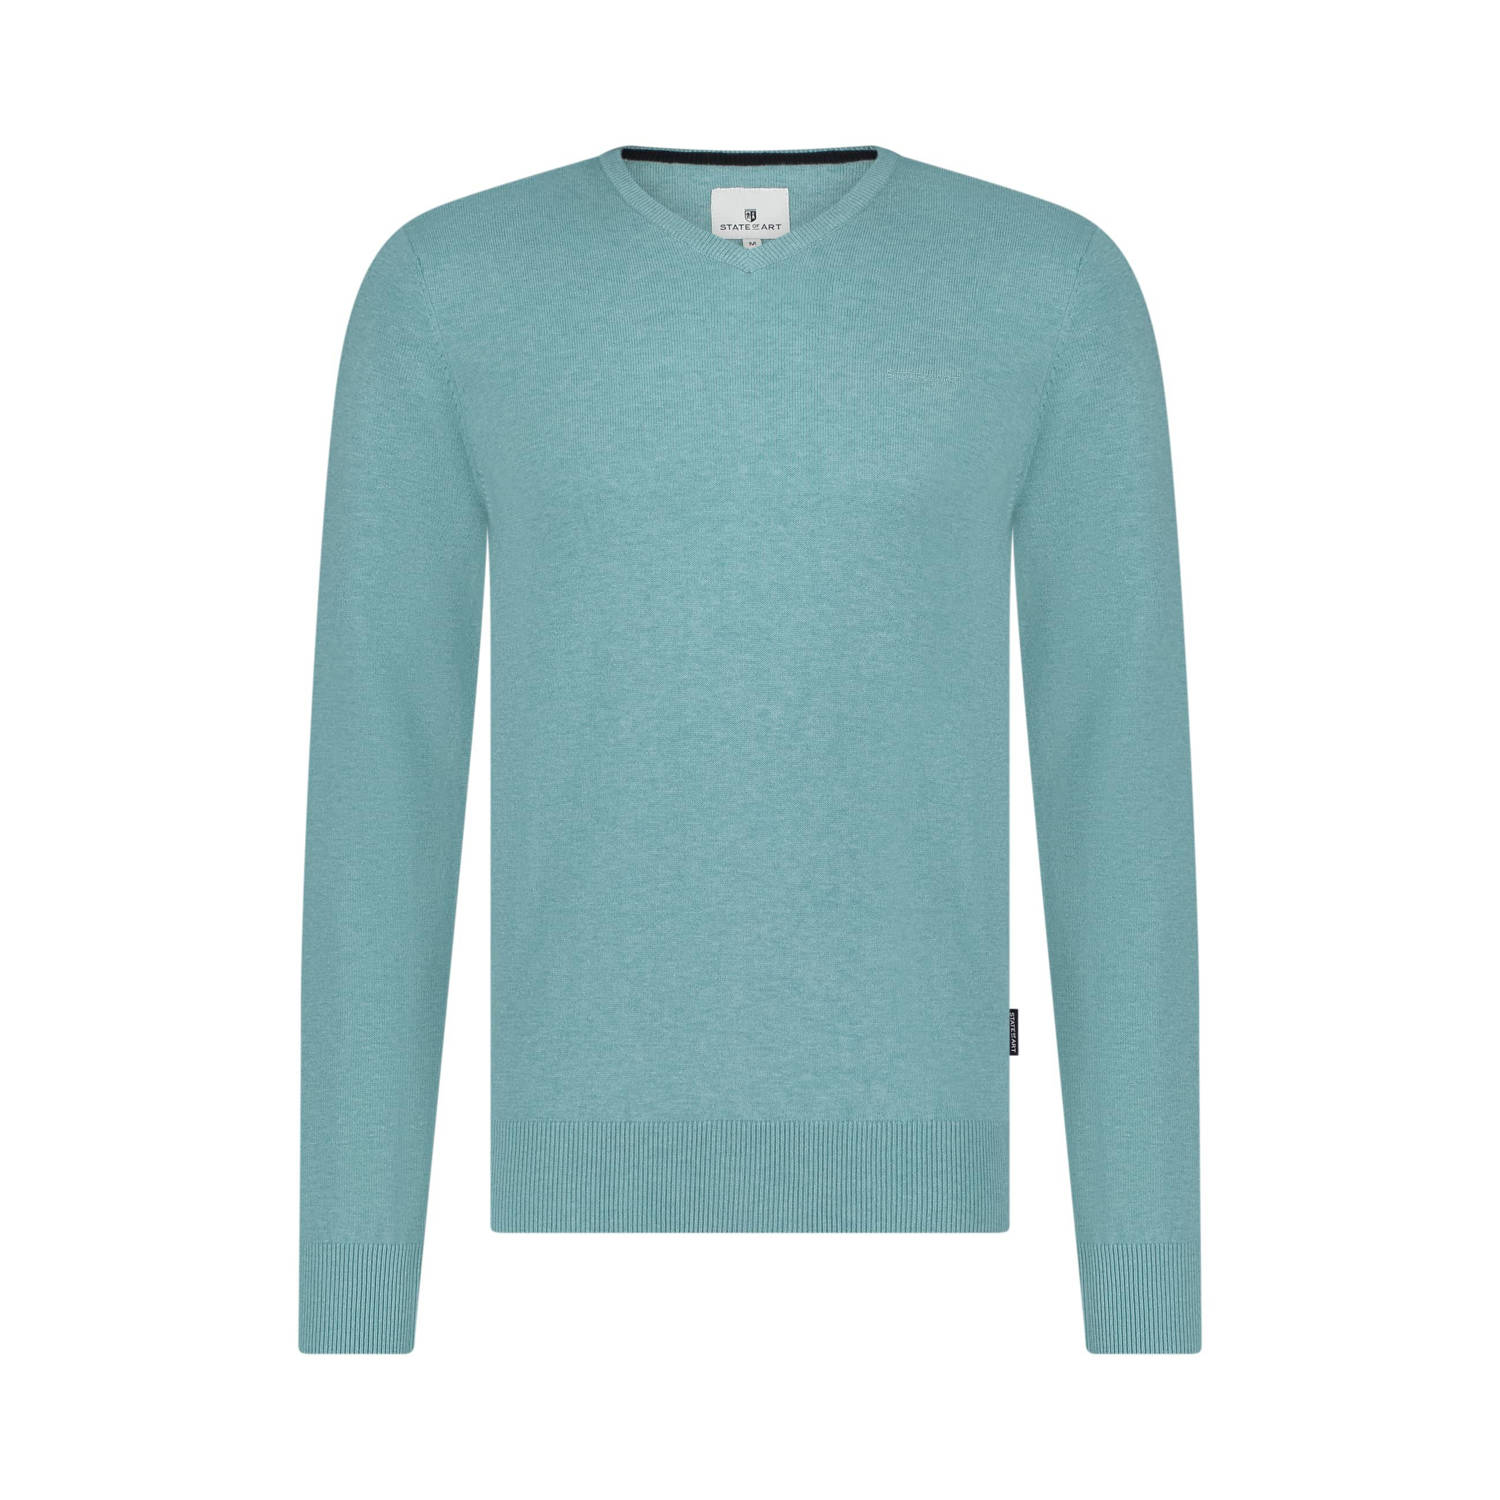 State of Art pullover azuurblauw